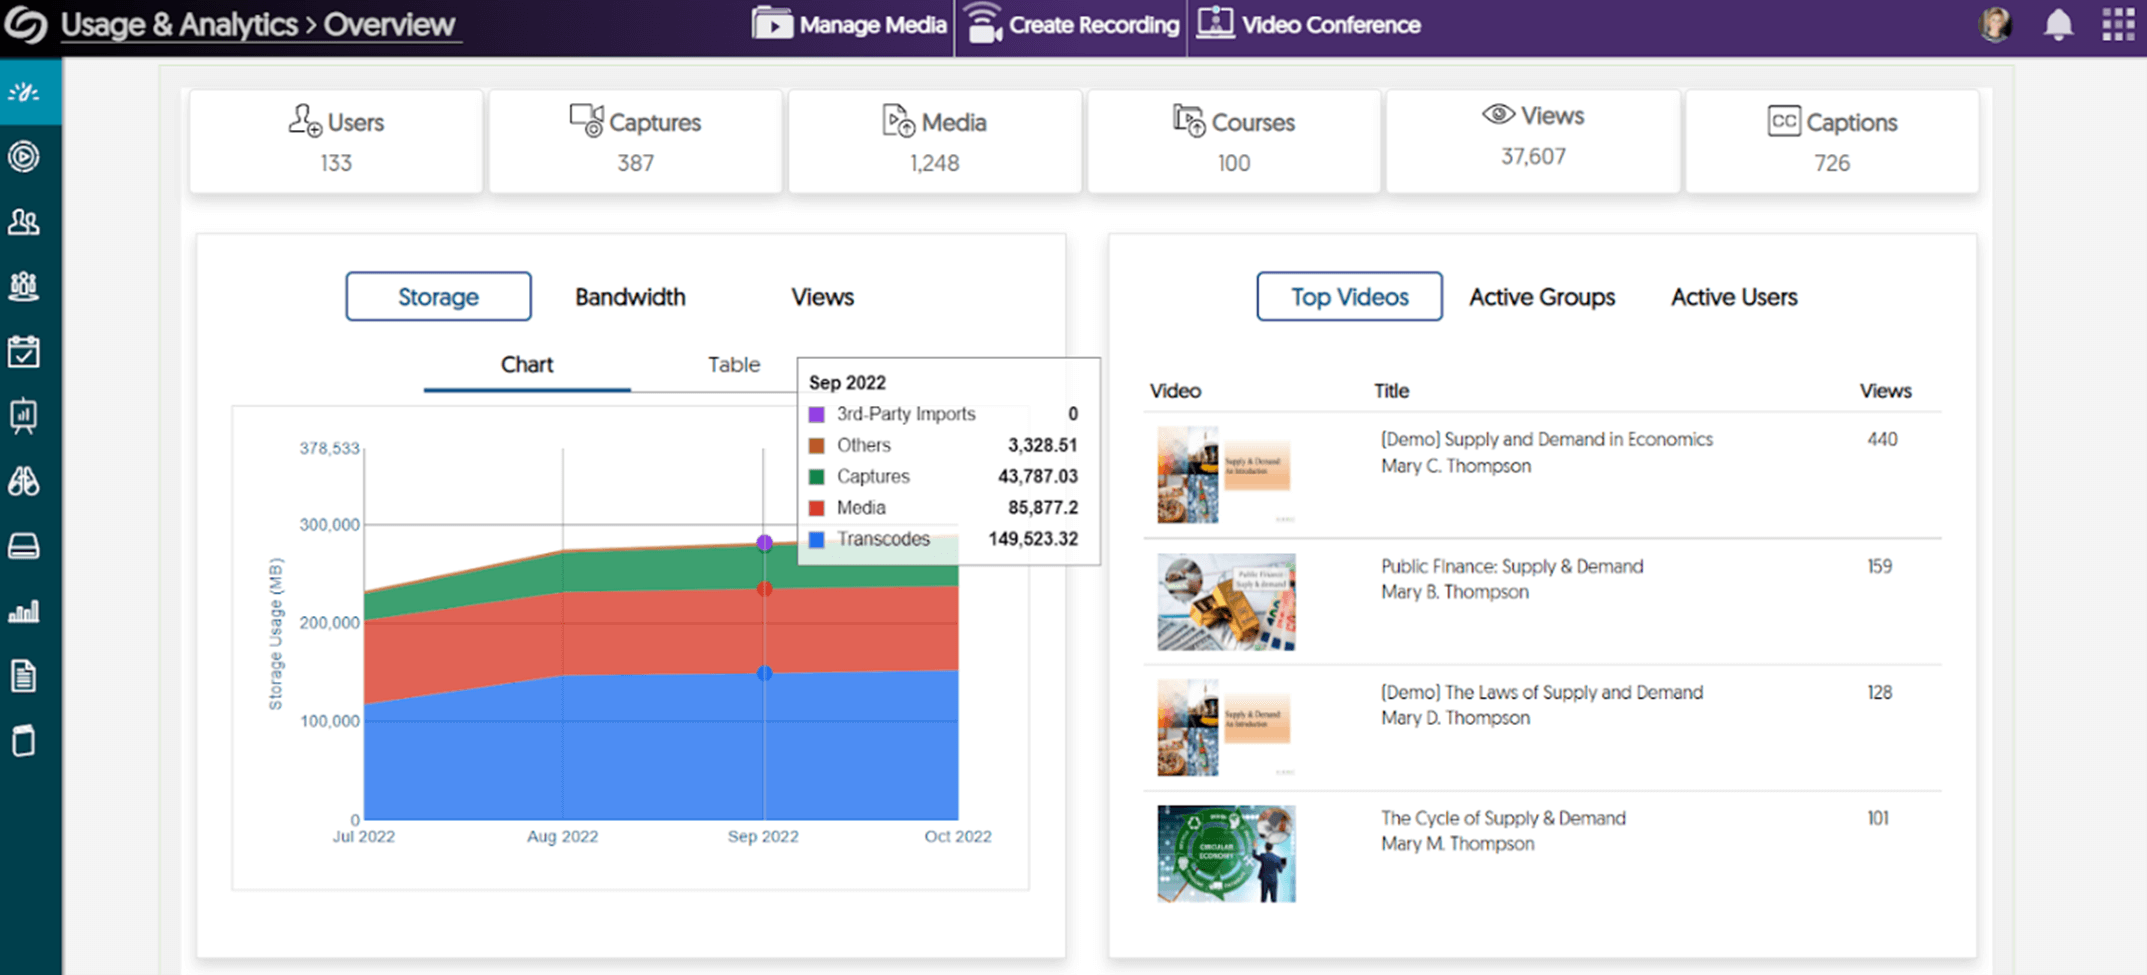 YuJa Video Usage and Analytics Overview page